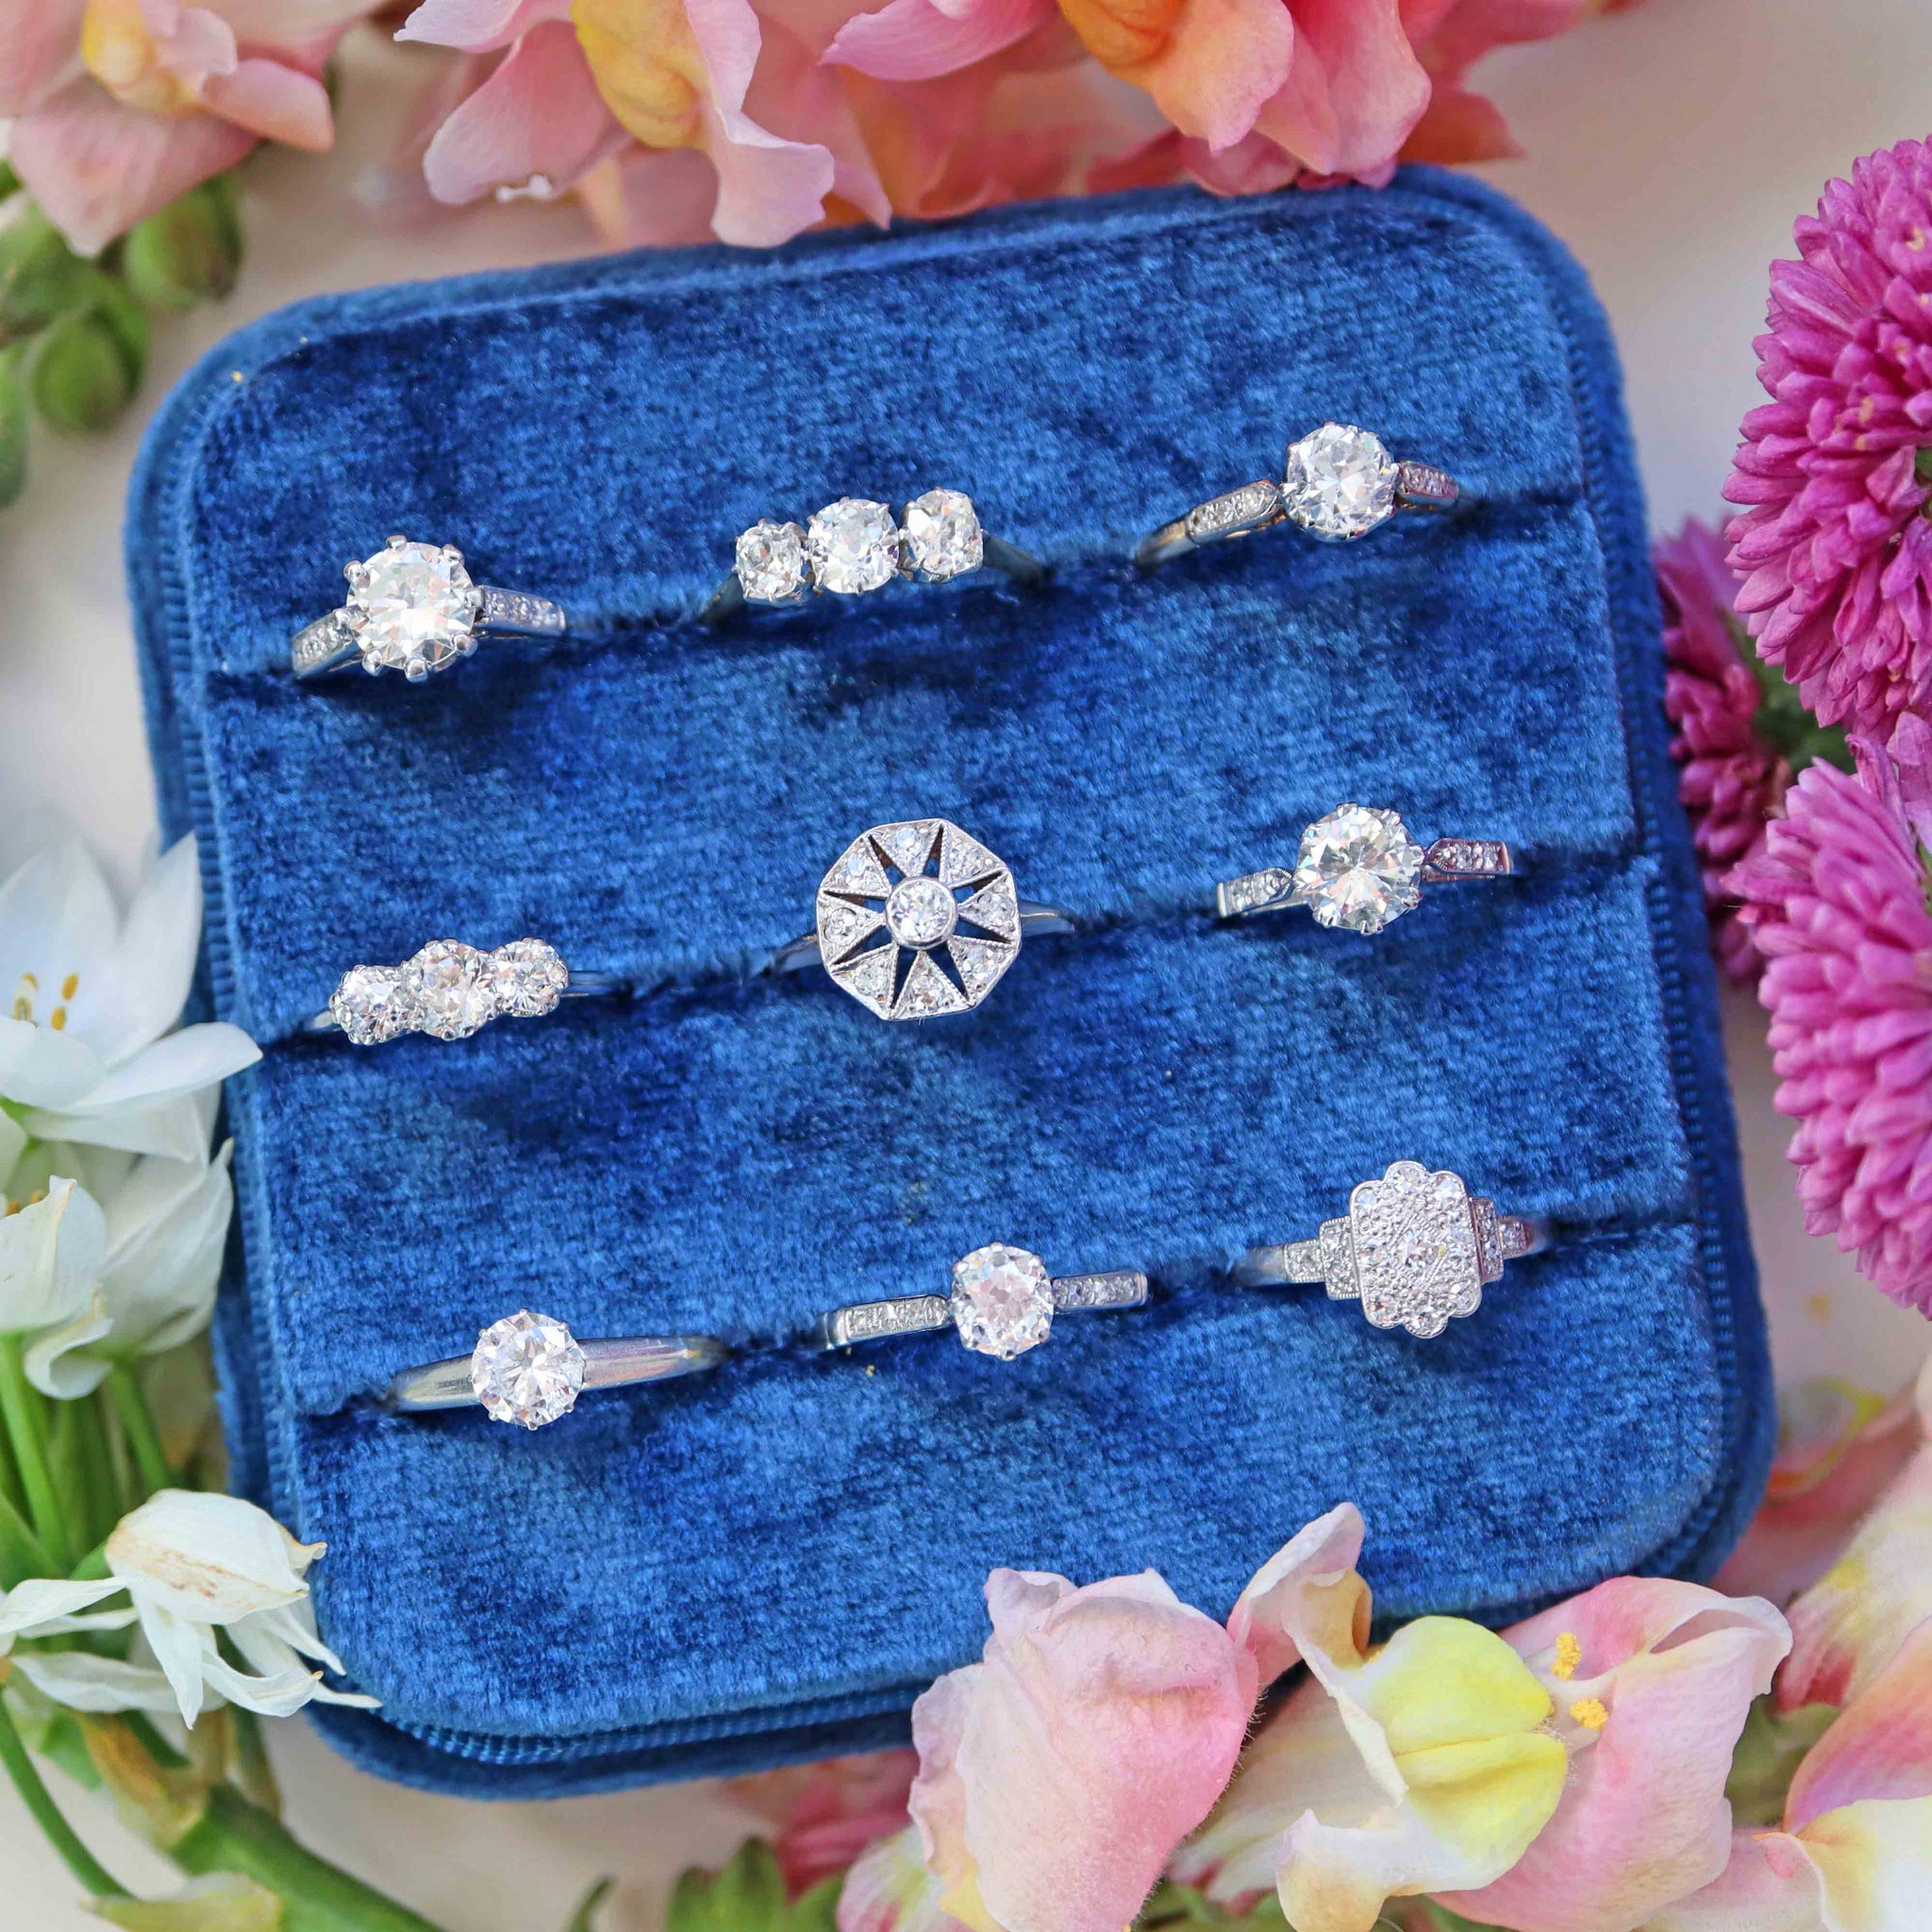 antique diamond rings in a blue tray